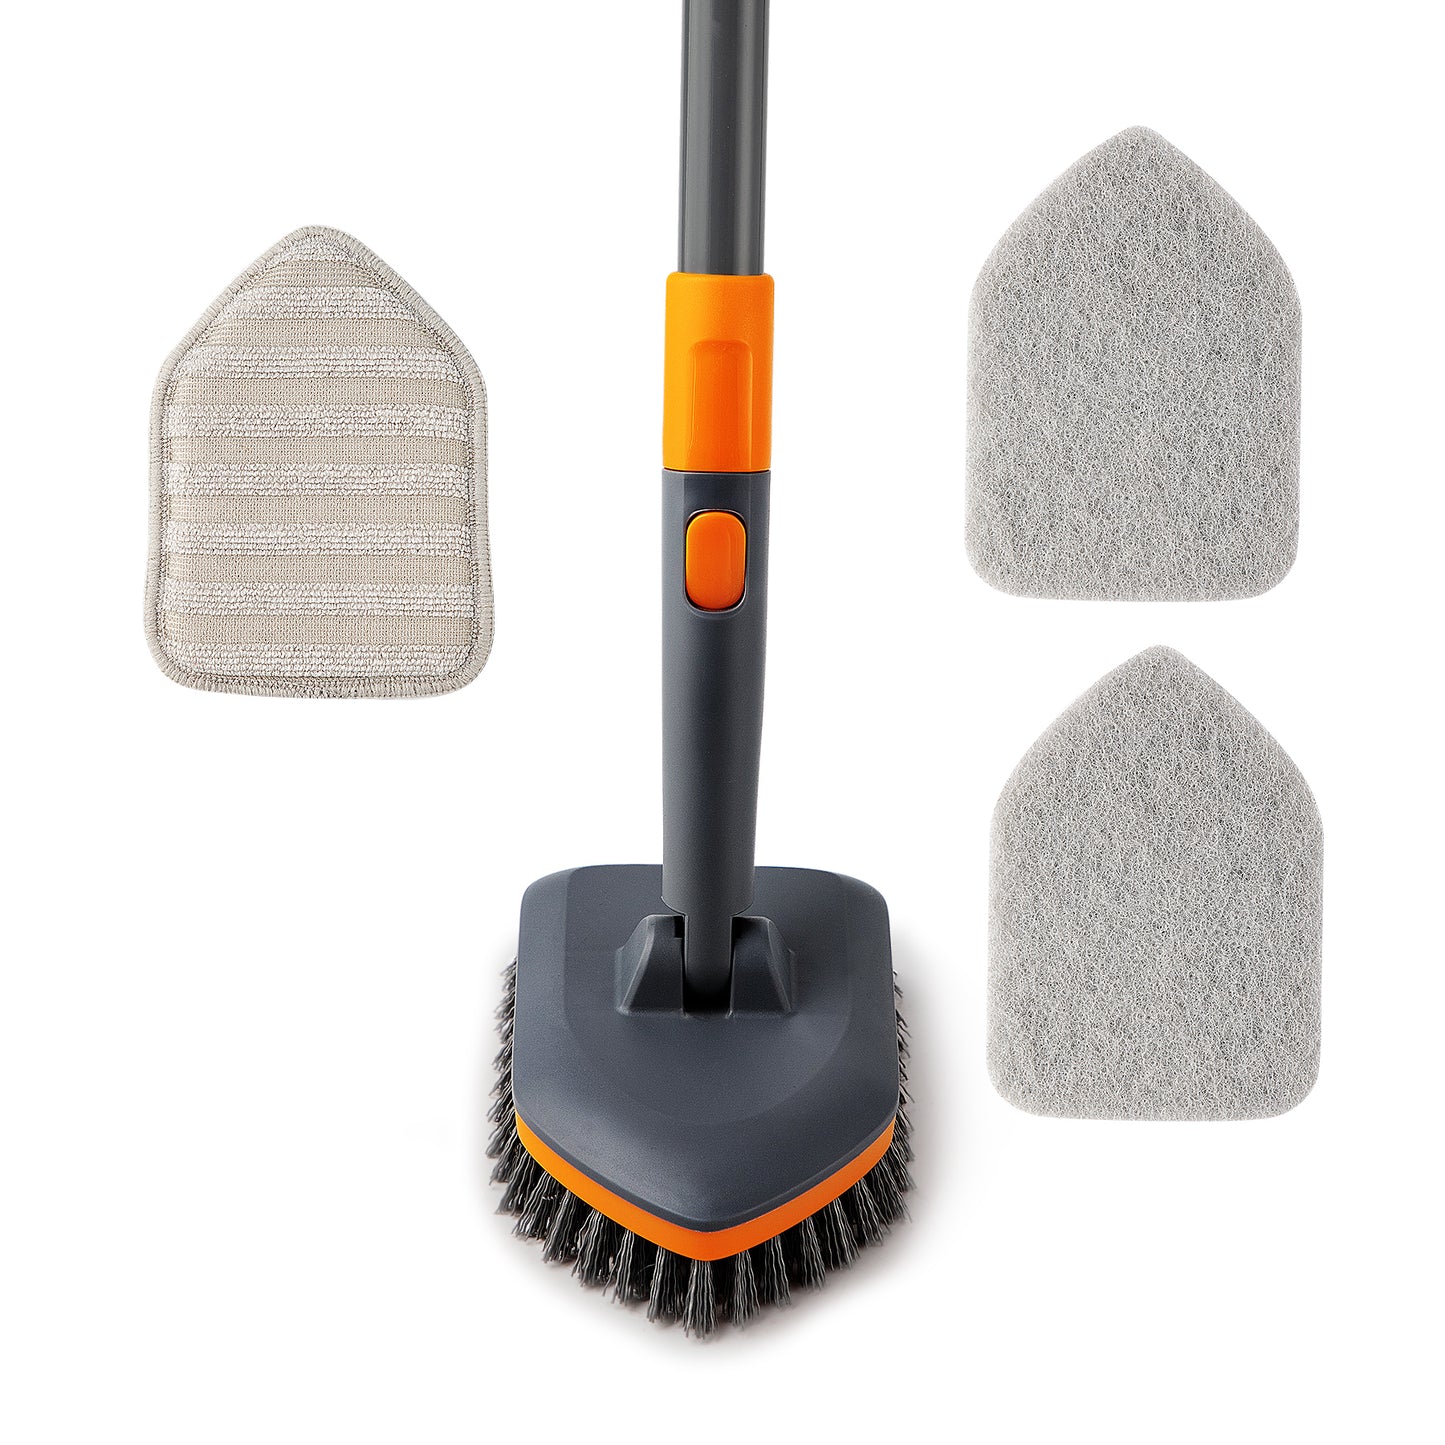 CLEANHOME Tile Tub Scrubber Brush with 3 Different Function